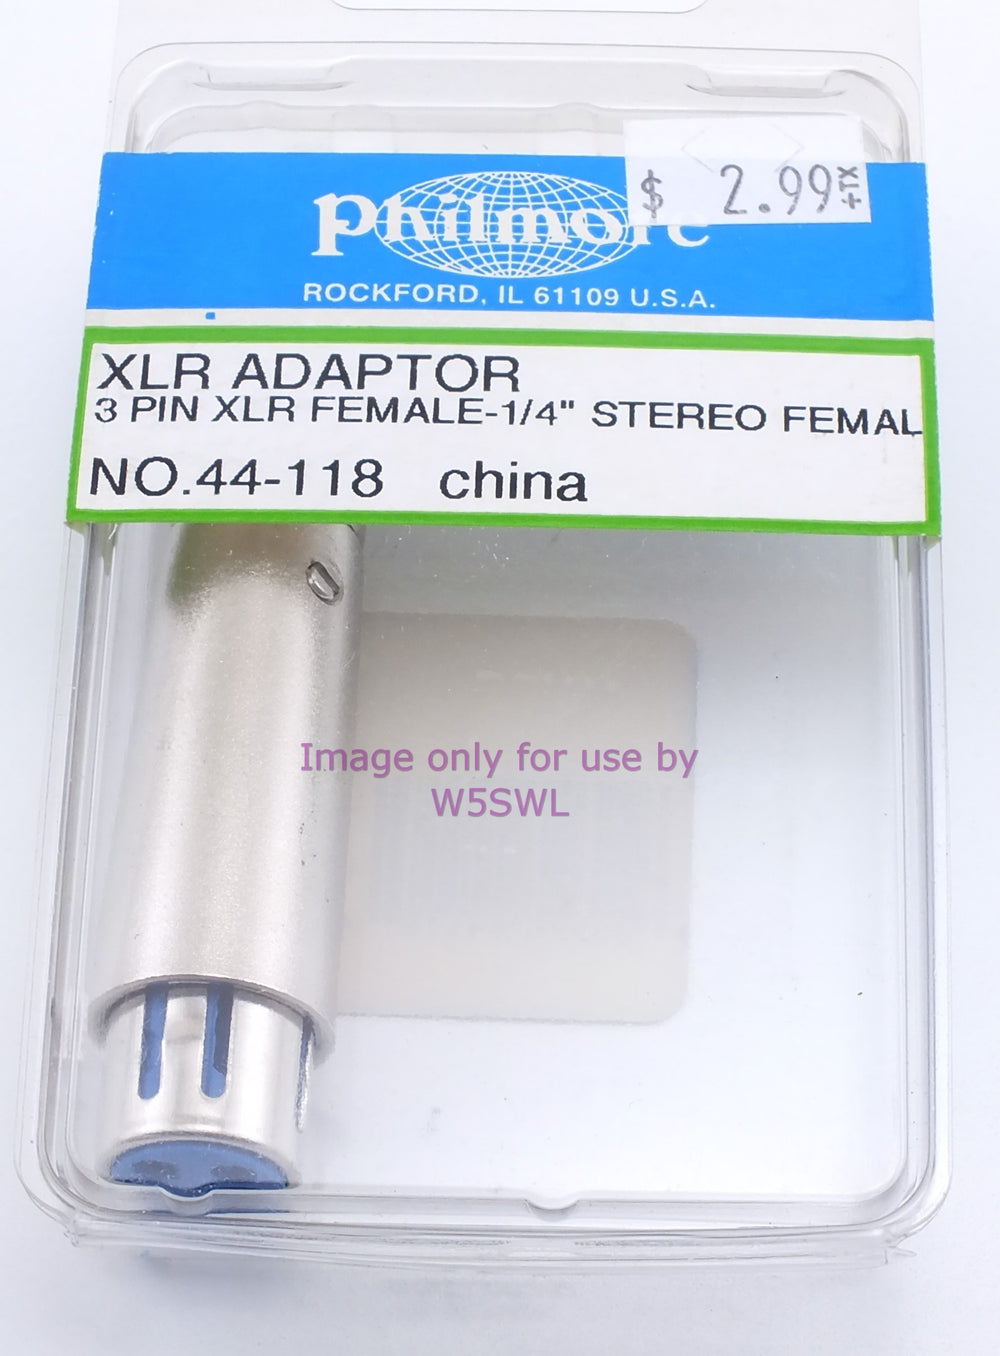 Philmore 44-118 XLR Adapter 3 Pin XLR Female to 1/4" Stereo Female (Bin2) - Dave's Hobby Shop by W5SWL